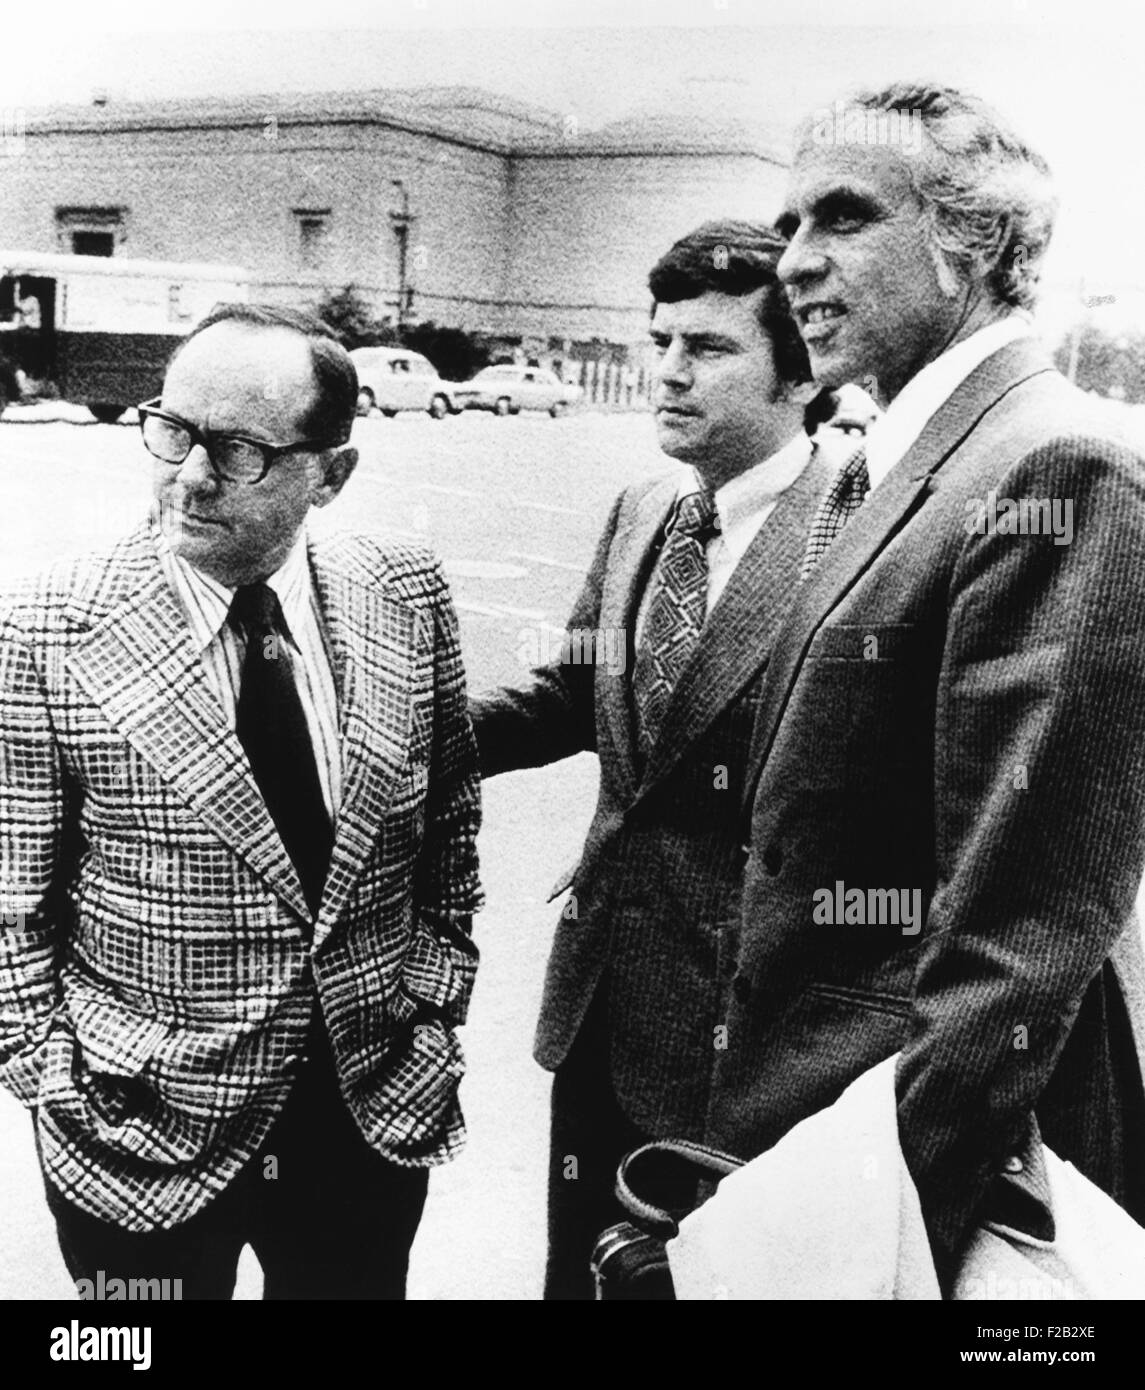 Watergate burglar Bernard Barker (center) leaves federal court in Miami on Oct. 27, 1972. Barker and his attorneys failed to get charges dropped for money laundering contributions from President Richard Nixon's 1972 campaign. L-R: Henry Rothblatt; Bernard Barker; David Goodhart. (CSU 2015 8 478) Stock Photo